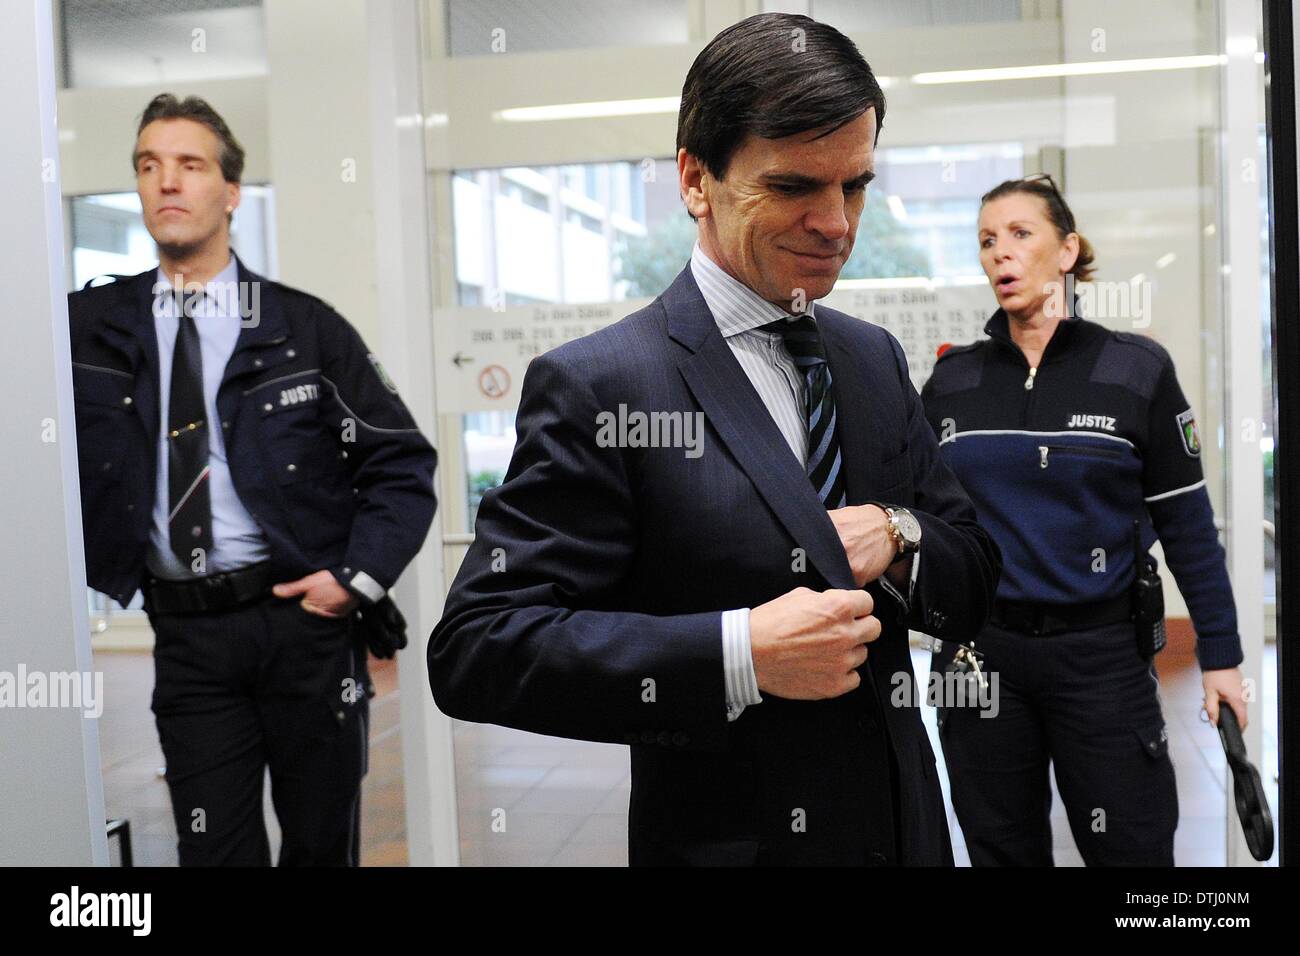 Cologne, Germany. 19th Feb, 2014. The head of investment bank Goldman Sachs in Germany, Alexander Dibelius (frot), arrives at the court room of the district court in Cologne, Germany, 19 February 2014. Dibelius is a witness in the Sal. Oppenheim trial. Photo: OLIVER BERG/dpa/Alamy Live News Stock Photo